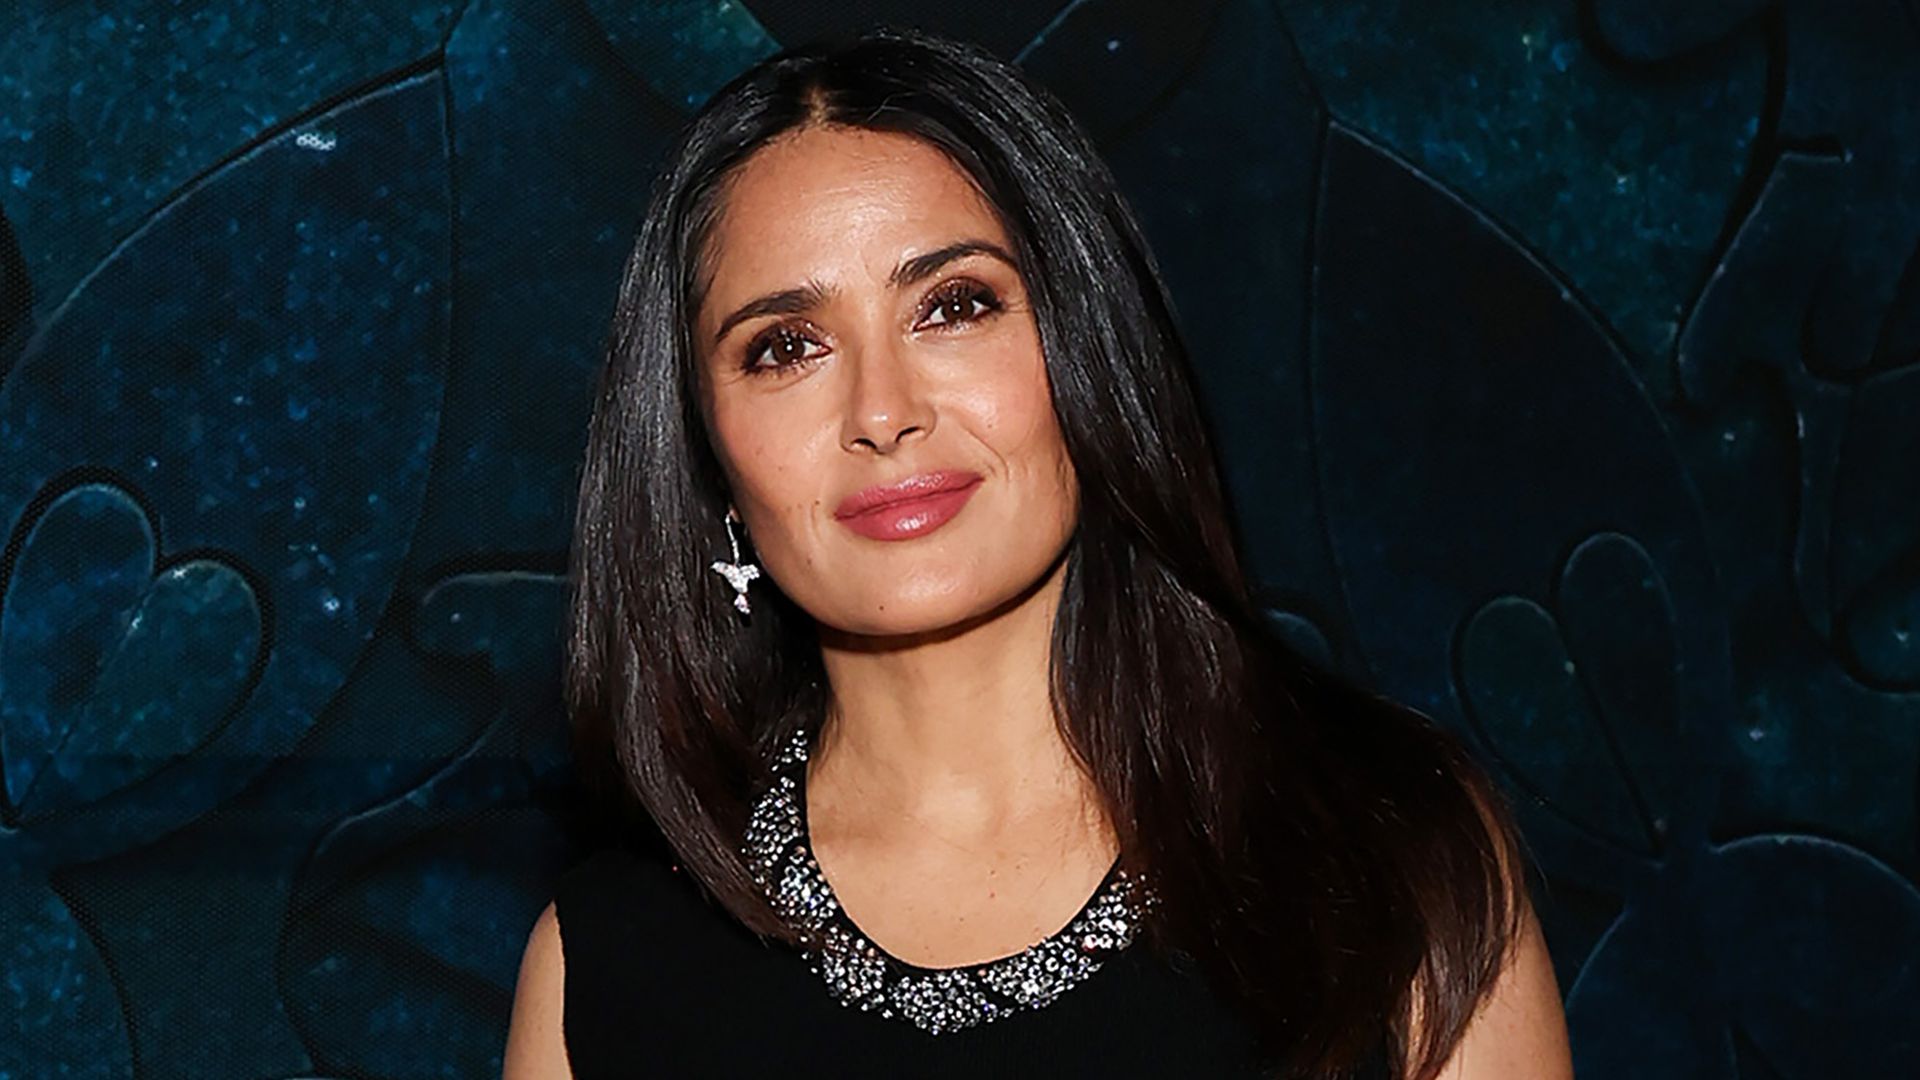 Salma Hayek wearing black silver detail top and matching earrings at Frequency vernissage